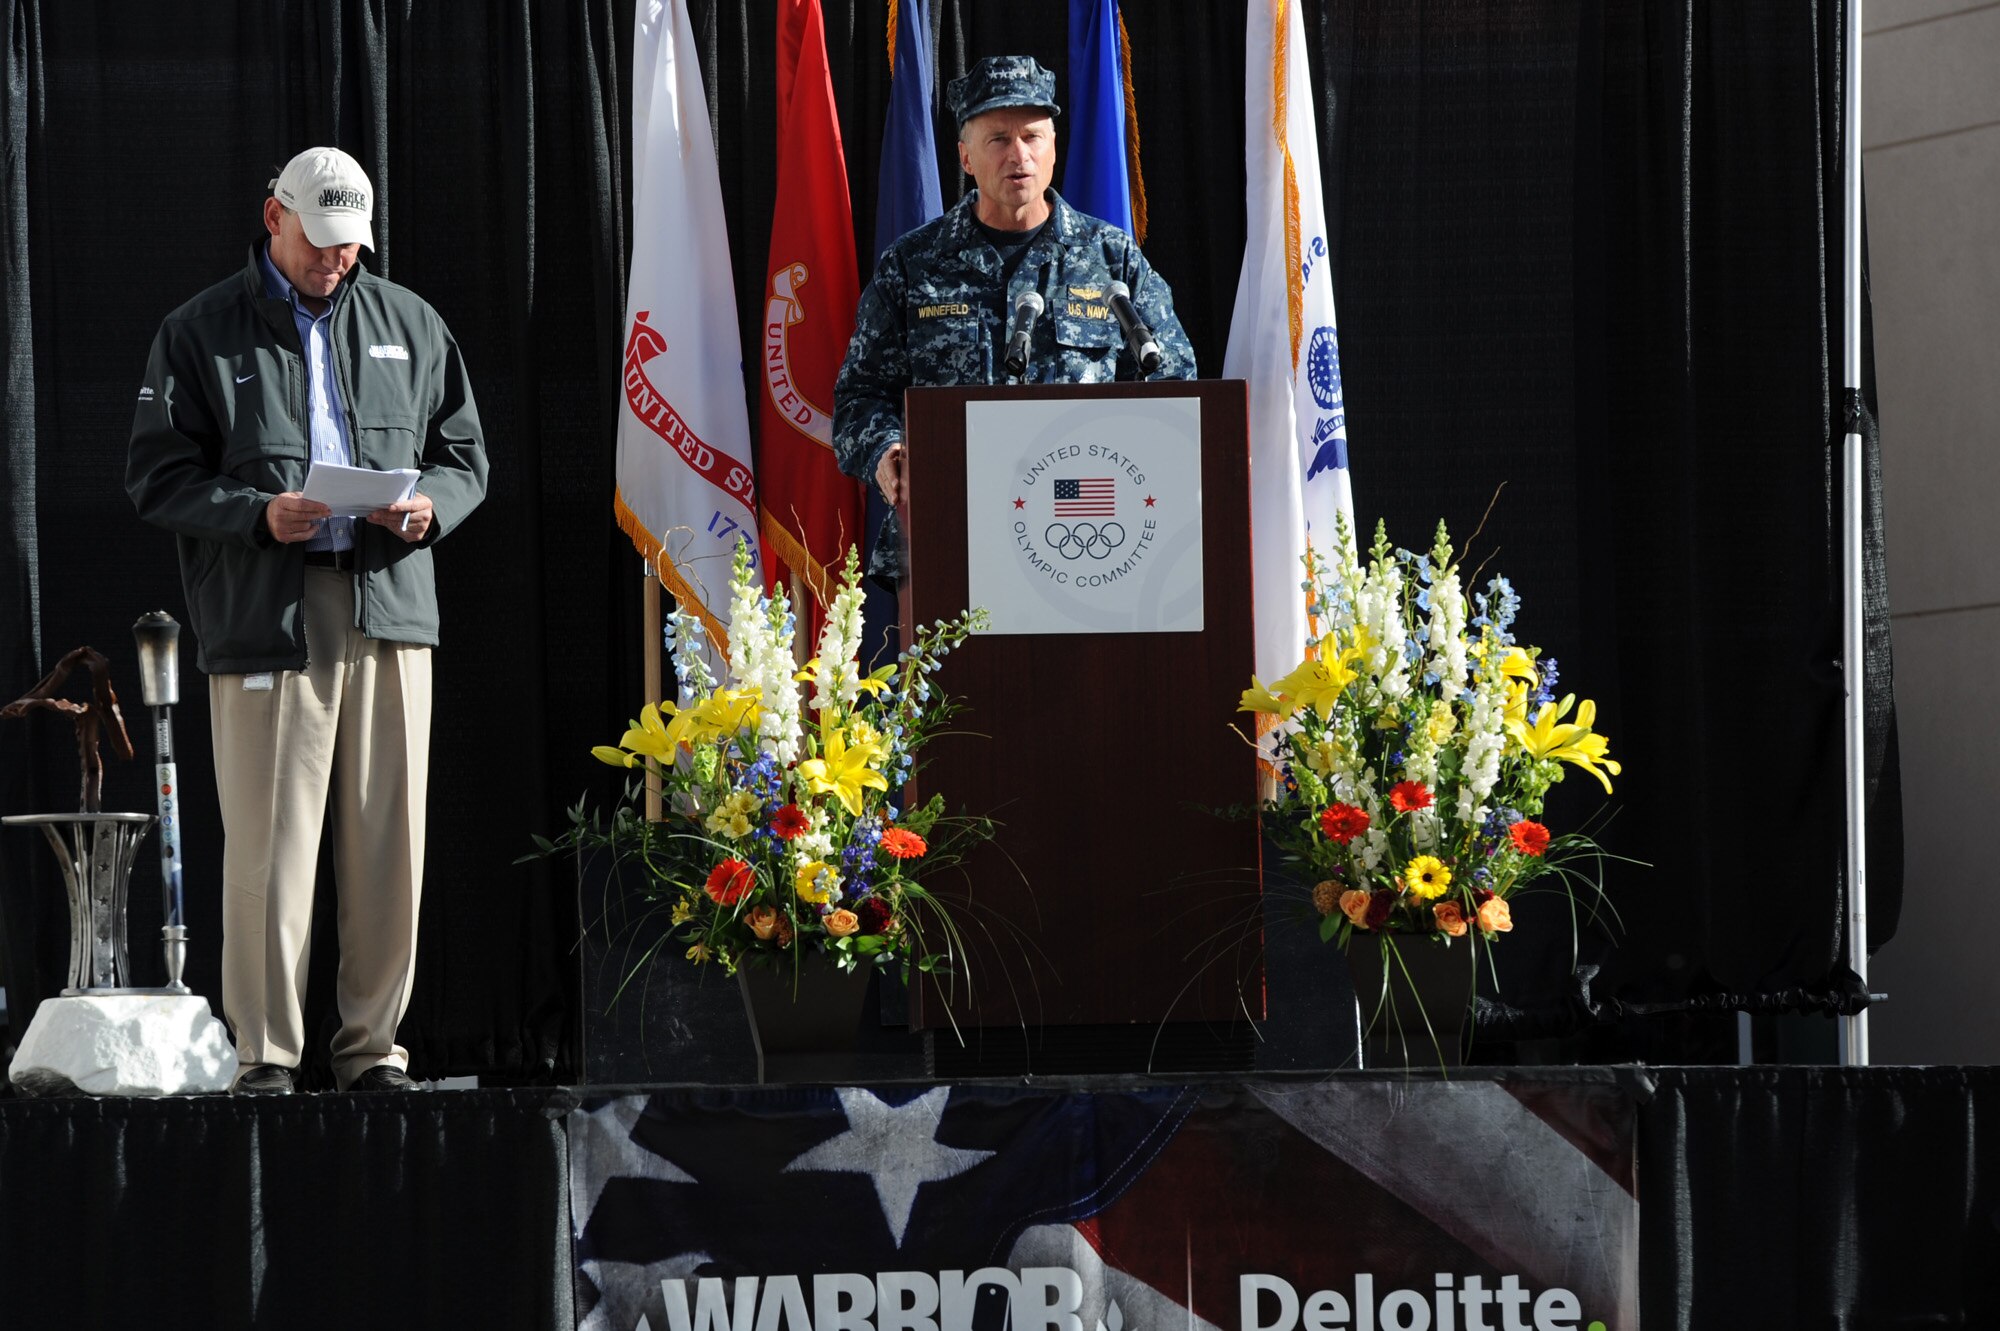 Navy Adm. James Winnefeld speaks during the 2011 Warrior Games opening ceremony May 16, 2011, at the U.S. Olympic Training Center in Colorado Springs, Colo., May 16, 2011. Some 200 wounded warriors and disabled veterans from all the military services are competing in paralympic-style athletic events May 16 through May 21. Admiral Winnefeld is the North American Aerospace Defense Command and U.S. Northern Command commander. (U.S. Air Force photo/Staff Sgt. Desiree N. Palacios)
